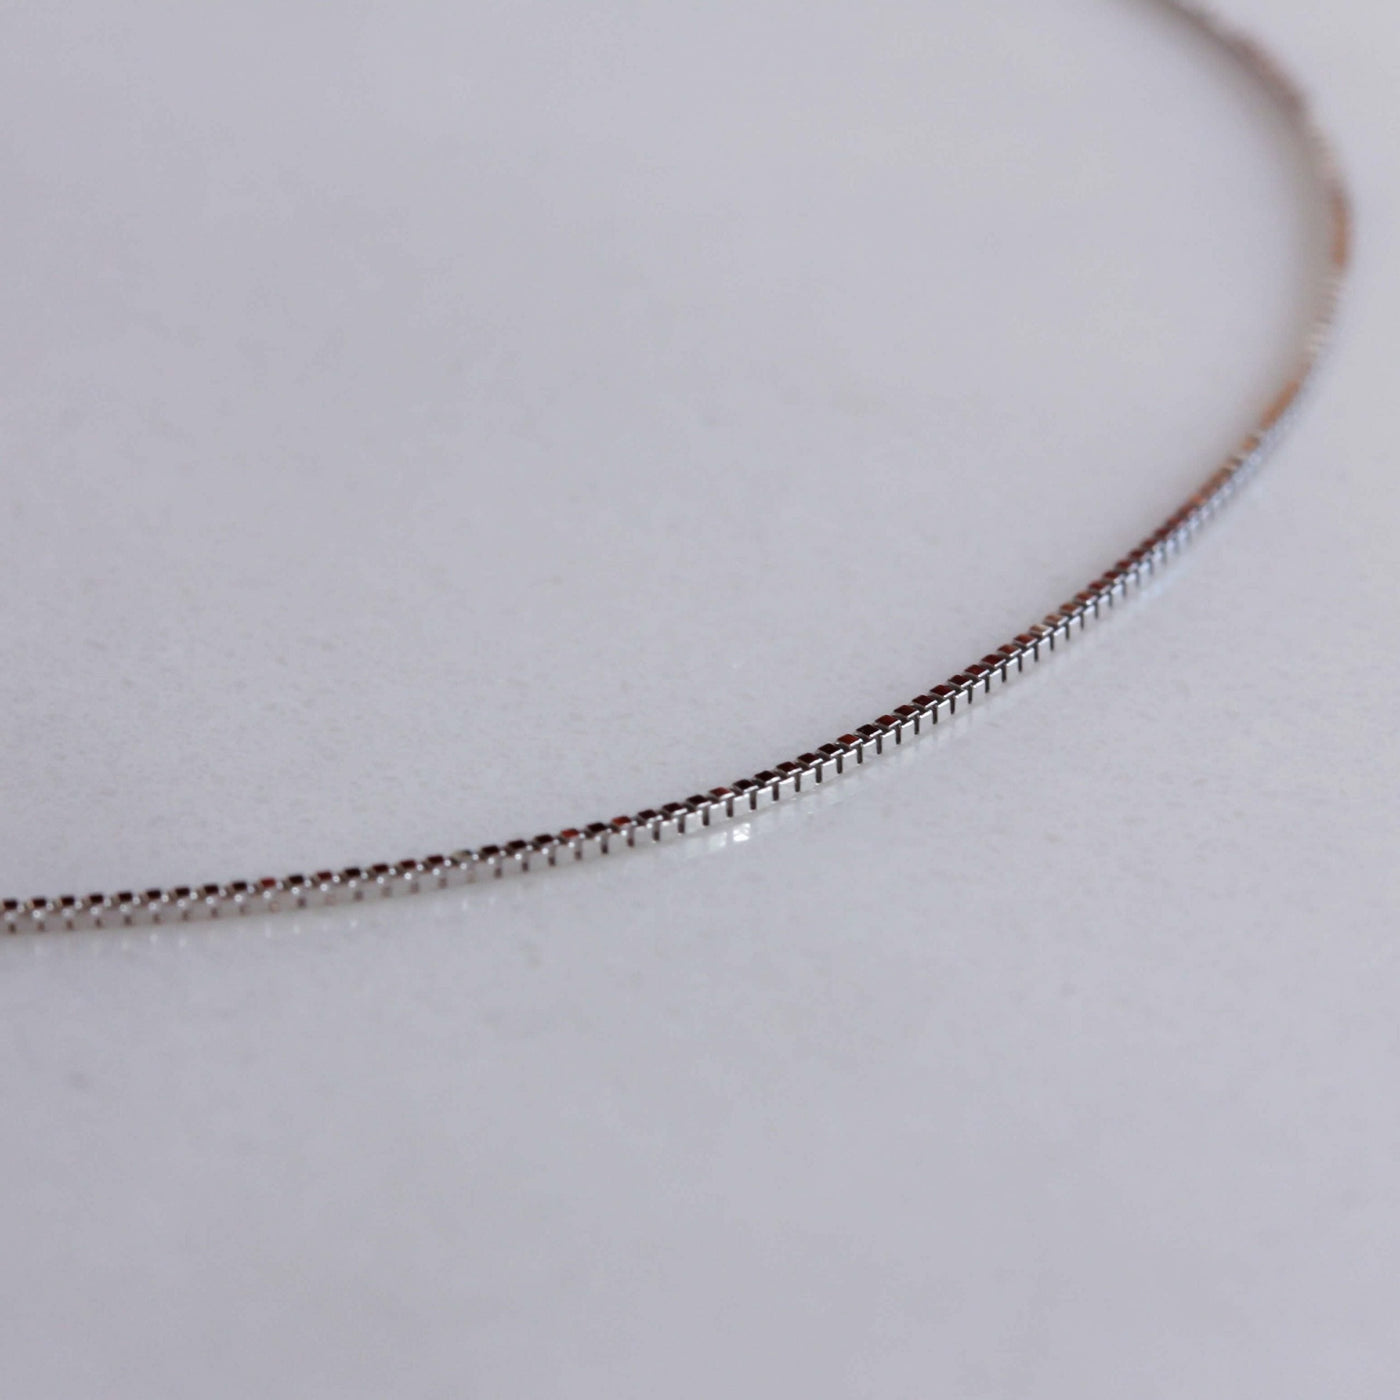 Plain Thin Billy Necklace 14K Gold Necklaces 